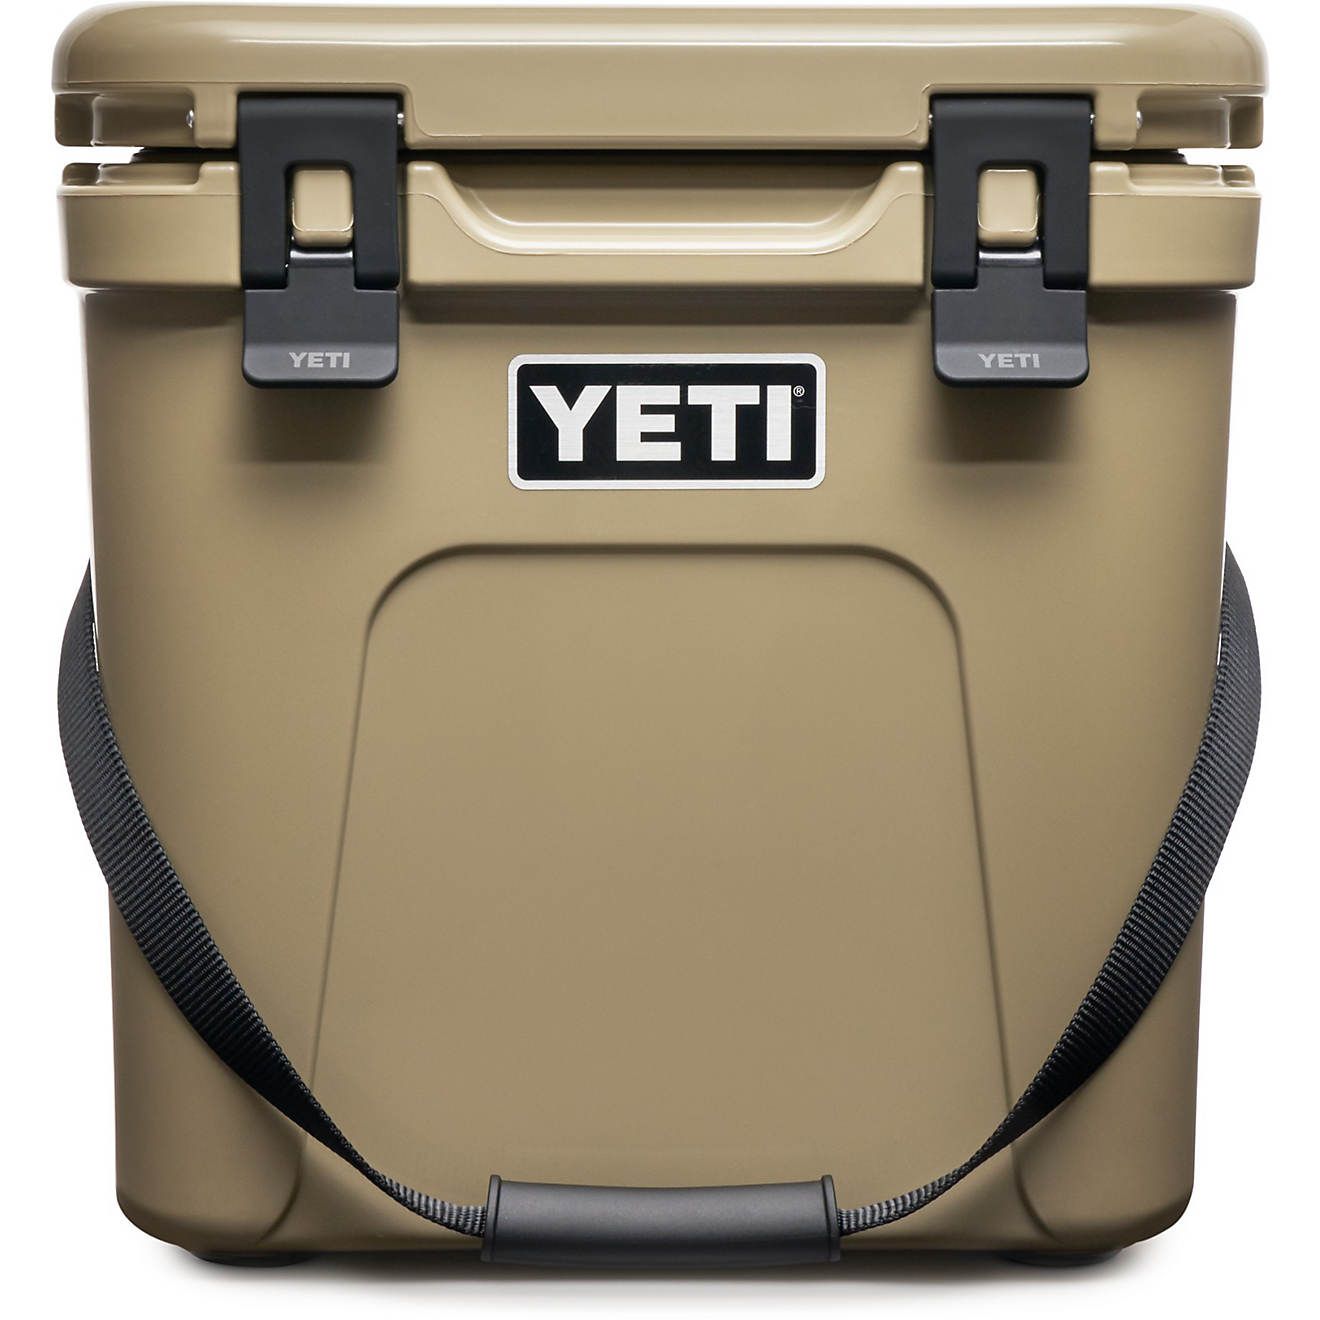 YETI Roadie 24 18-Can Hard Cooler | Academy | Academy Sports + Outdoors